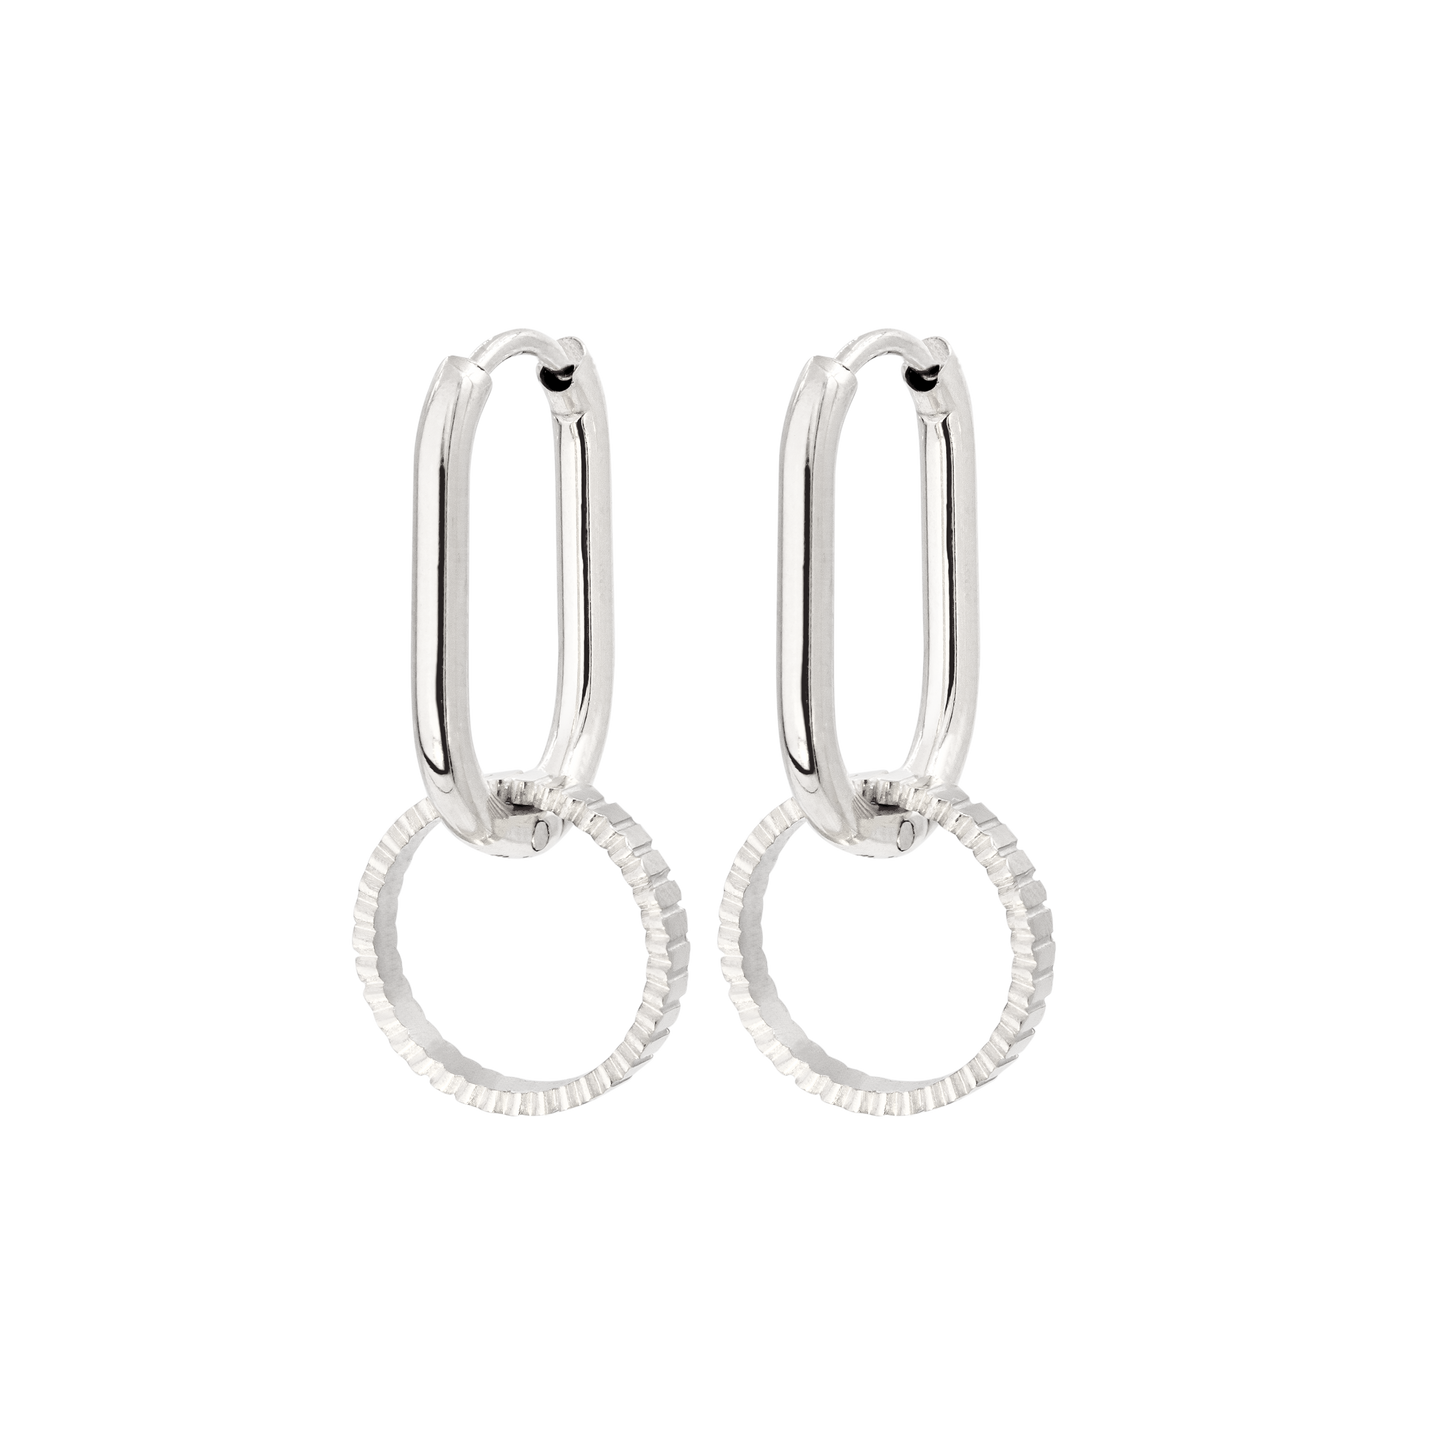 Oval Hoops and Stripes Argento